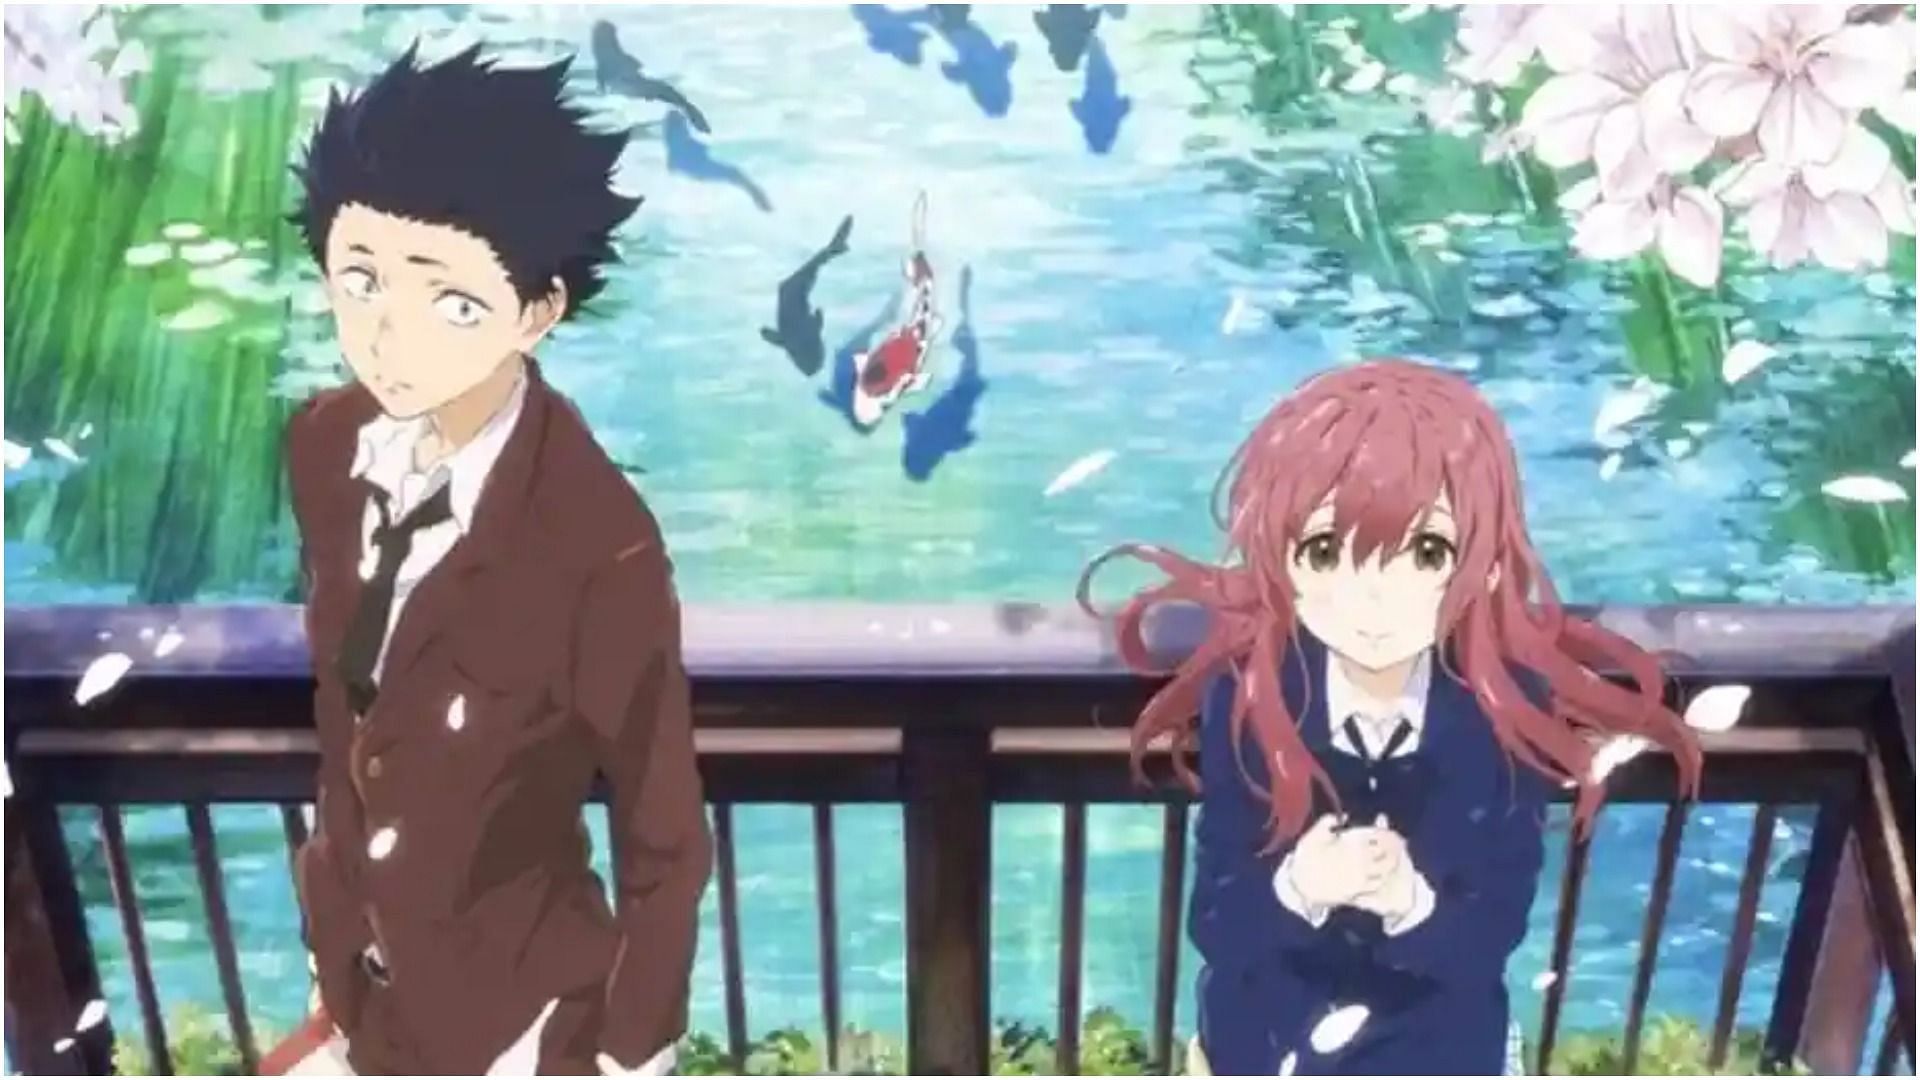 Ishida and Shoko as seen in A Silent Voice (Image via Kyoto Animation)